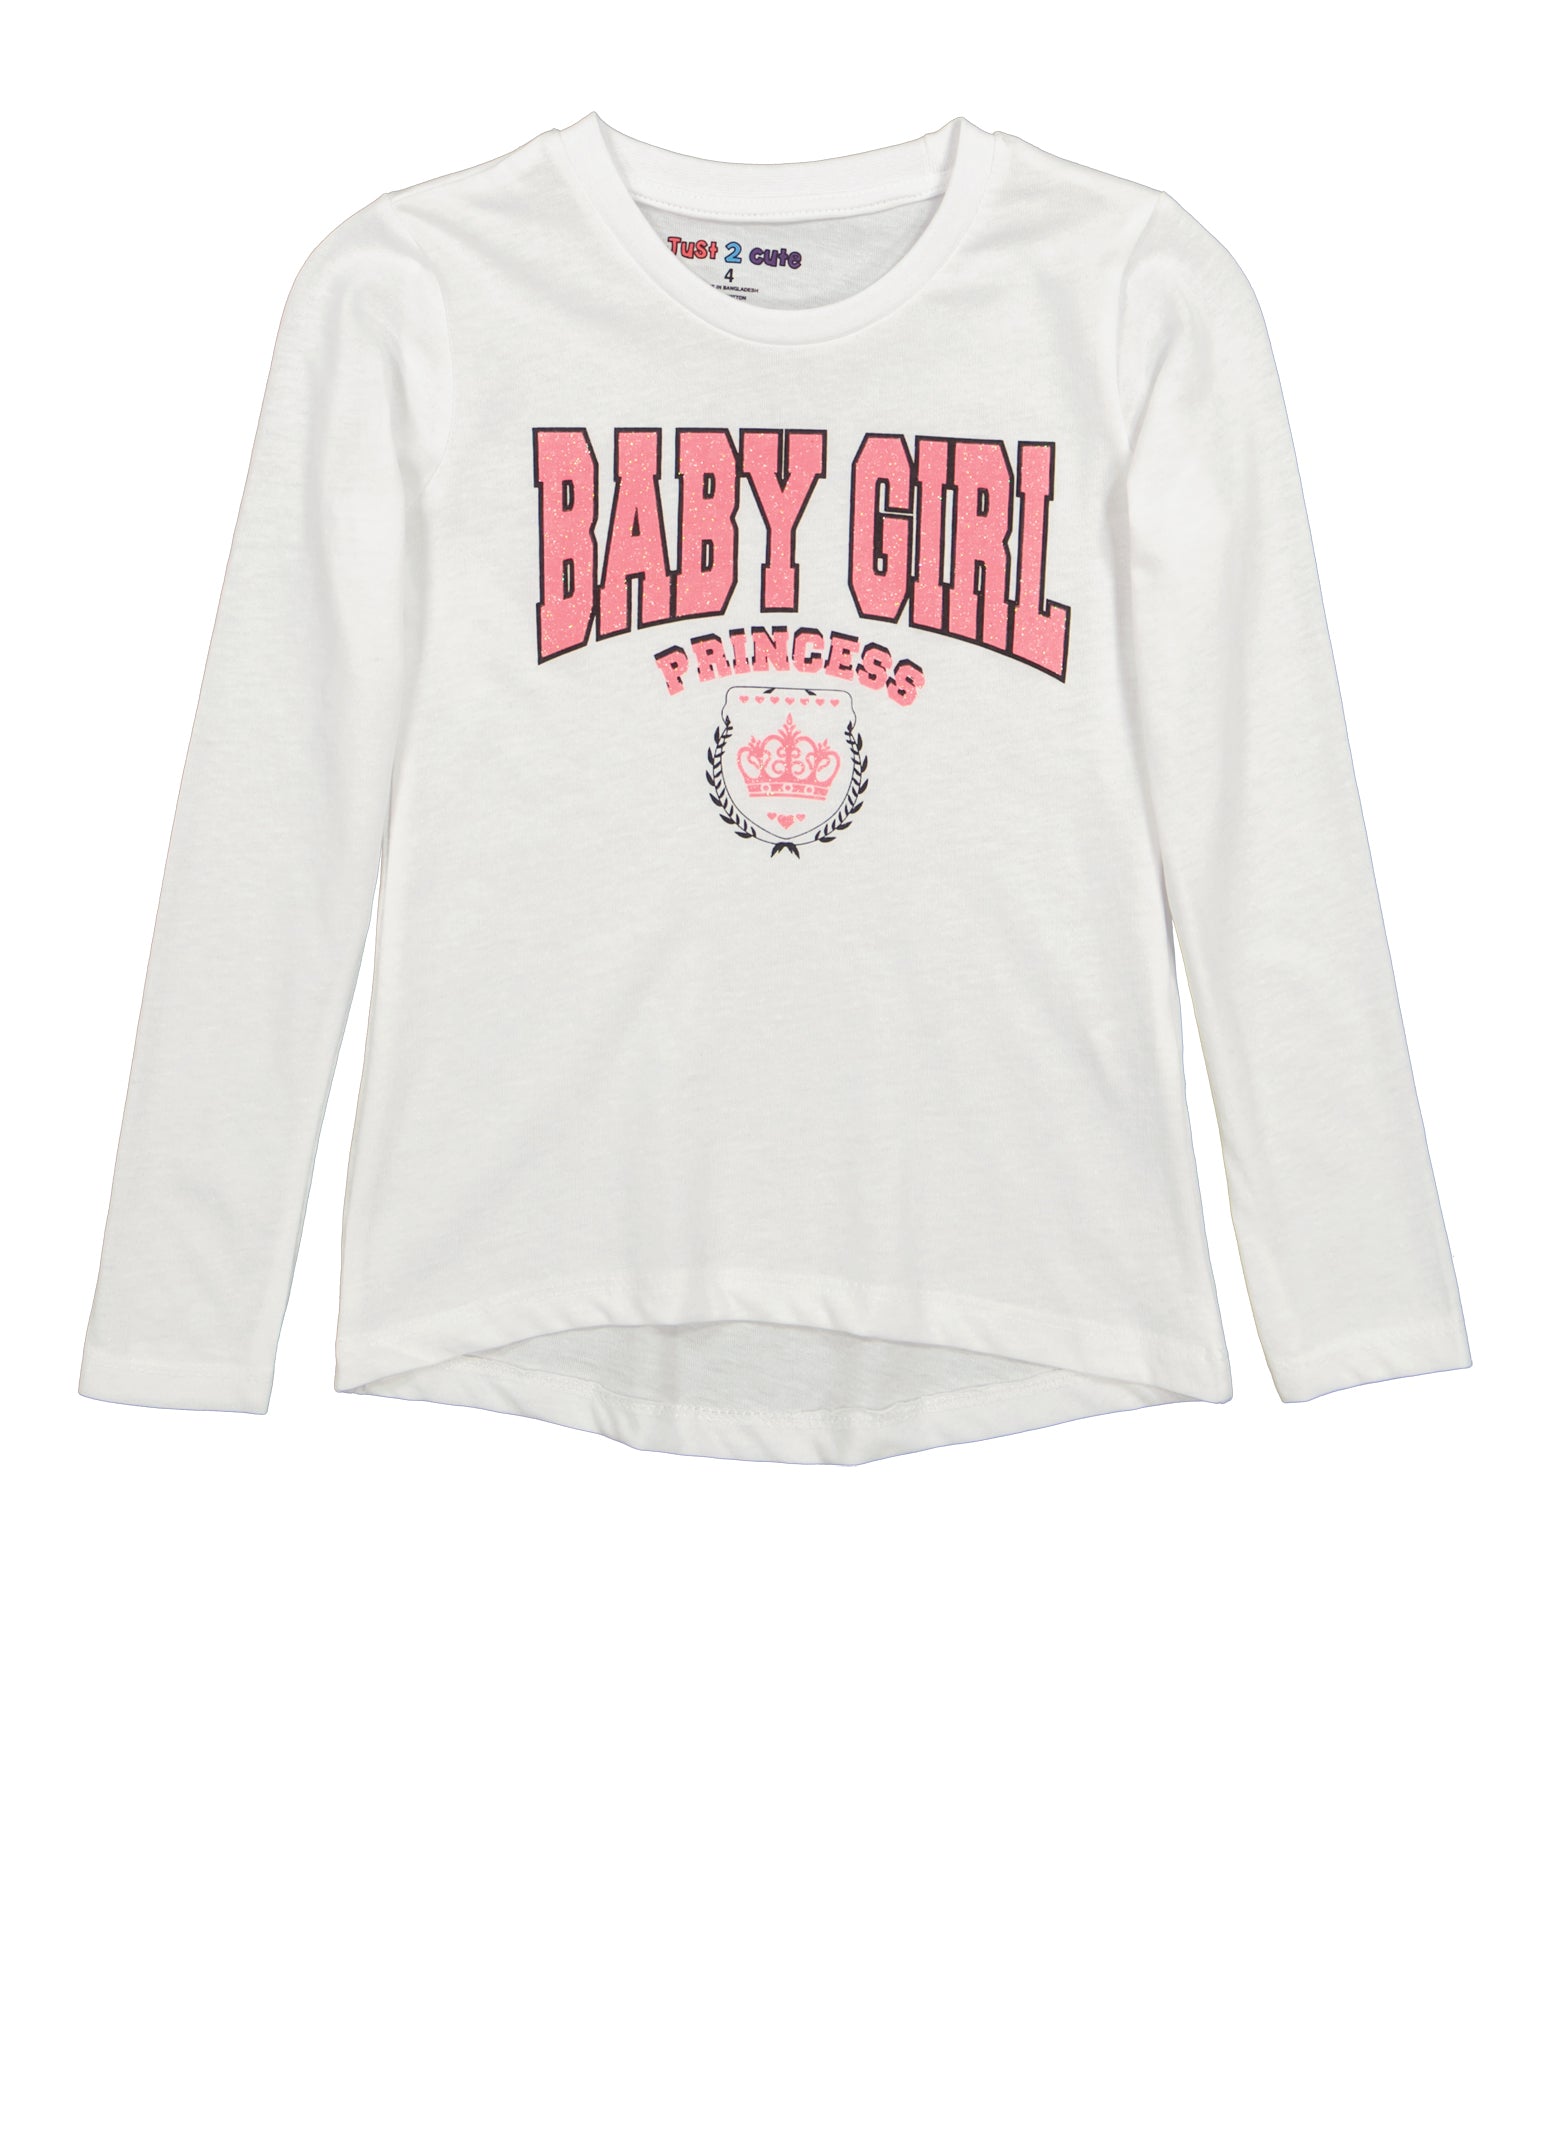 Little Girls Long Sleeve Baby Girl Princess Graphic Tee, White, Size 5-6